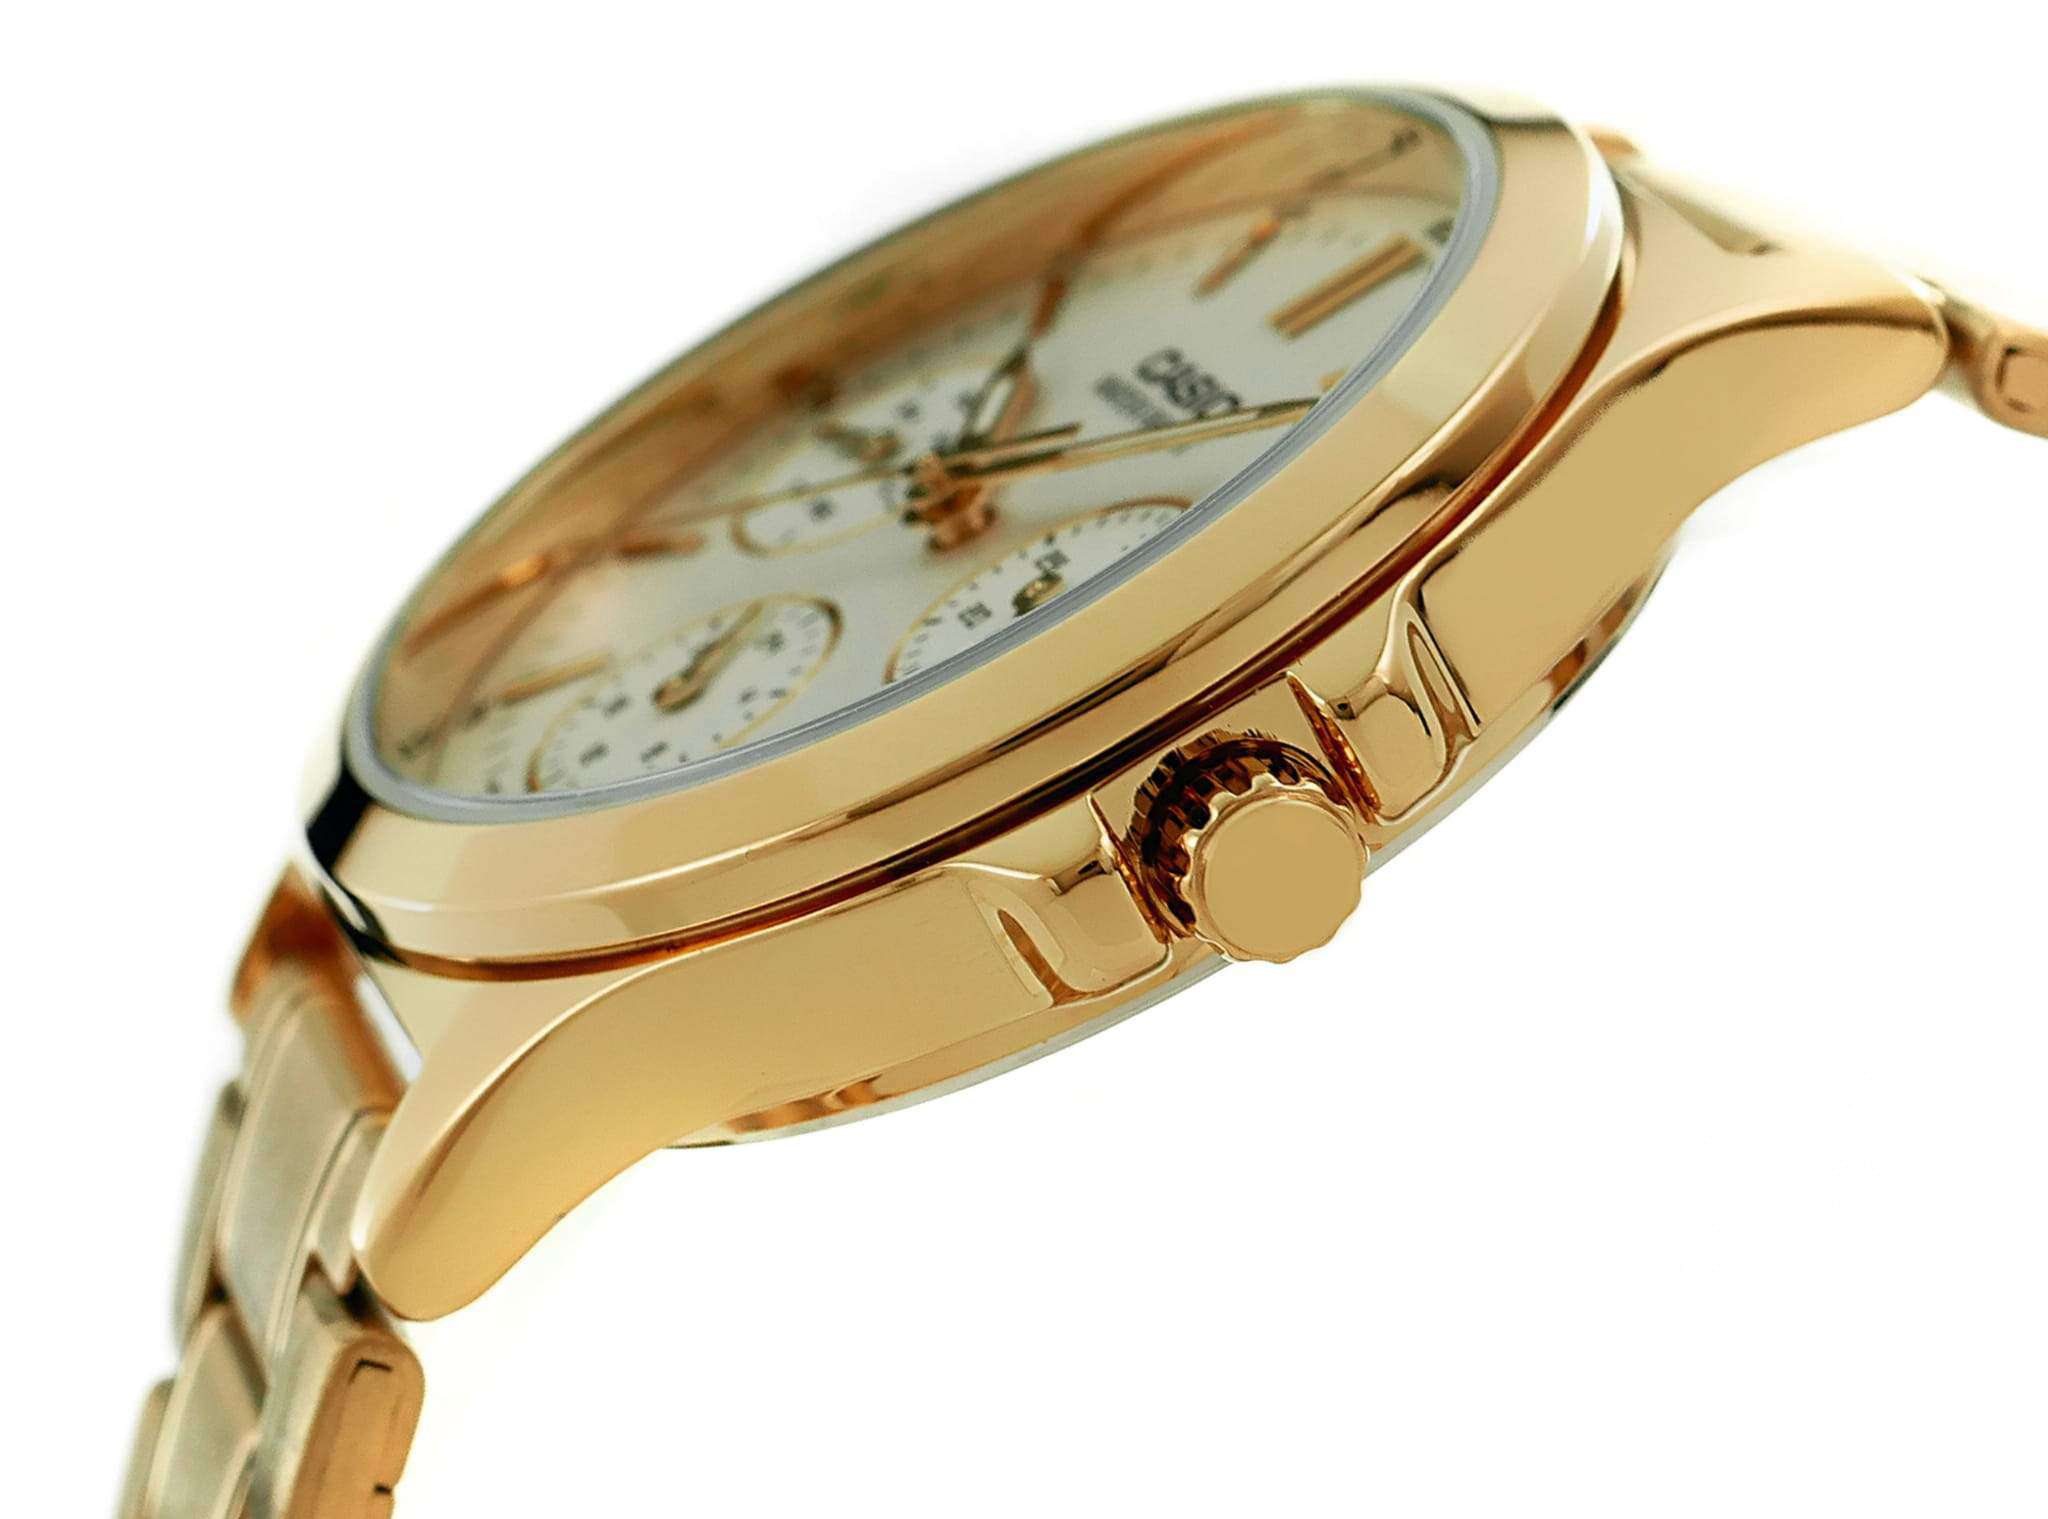 Casio LTP-V300G-7A Gold Plated Strap Watch for Women-Watch Portal Philippines